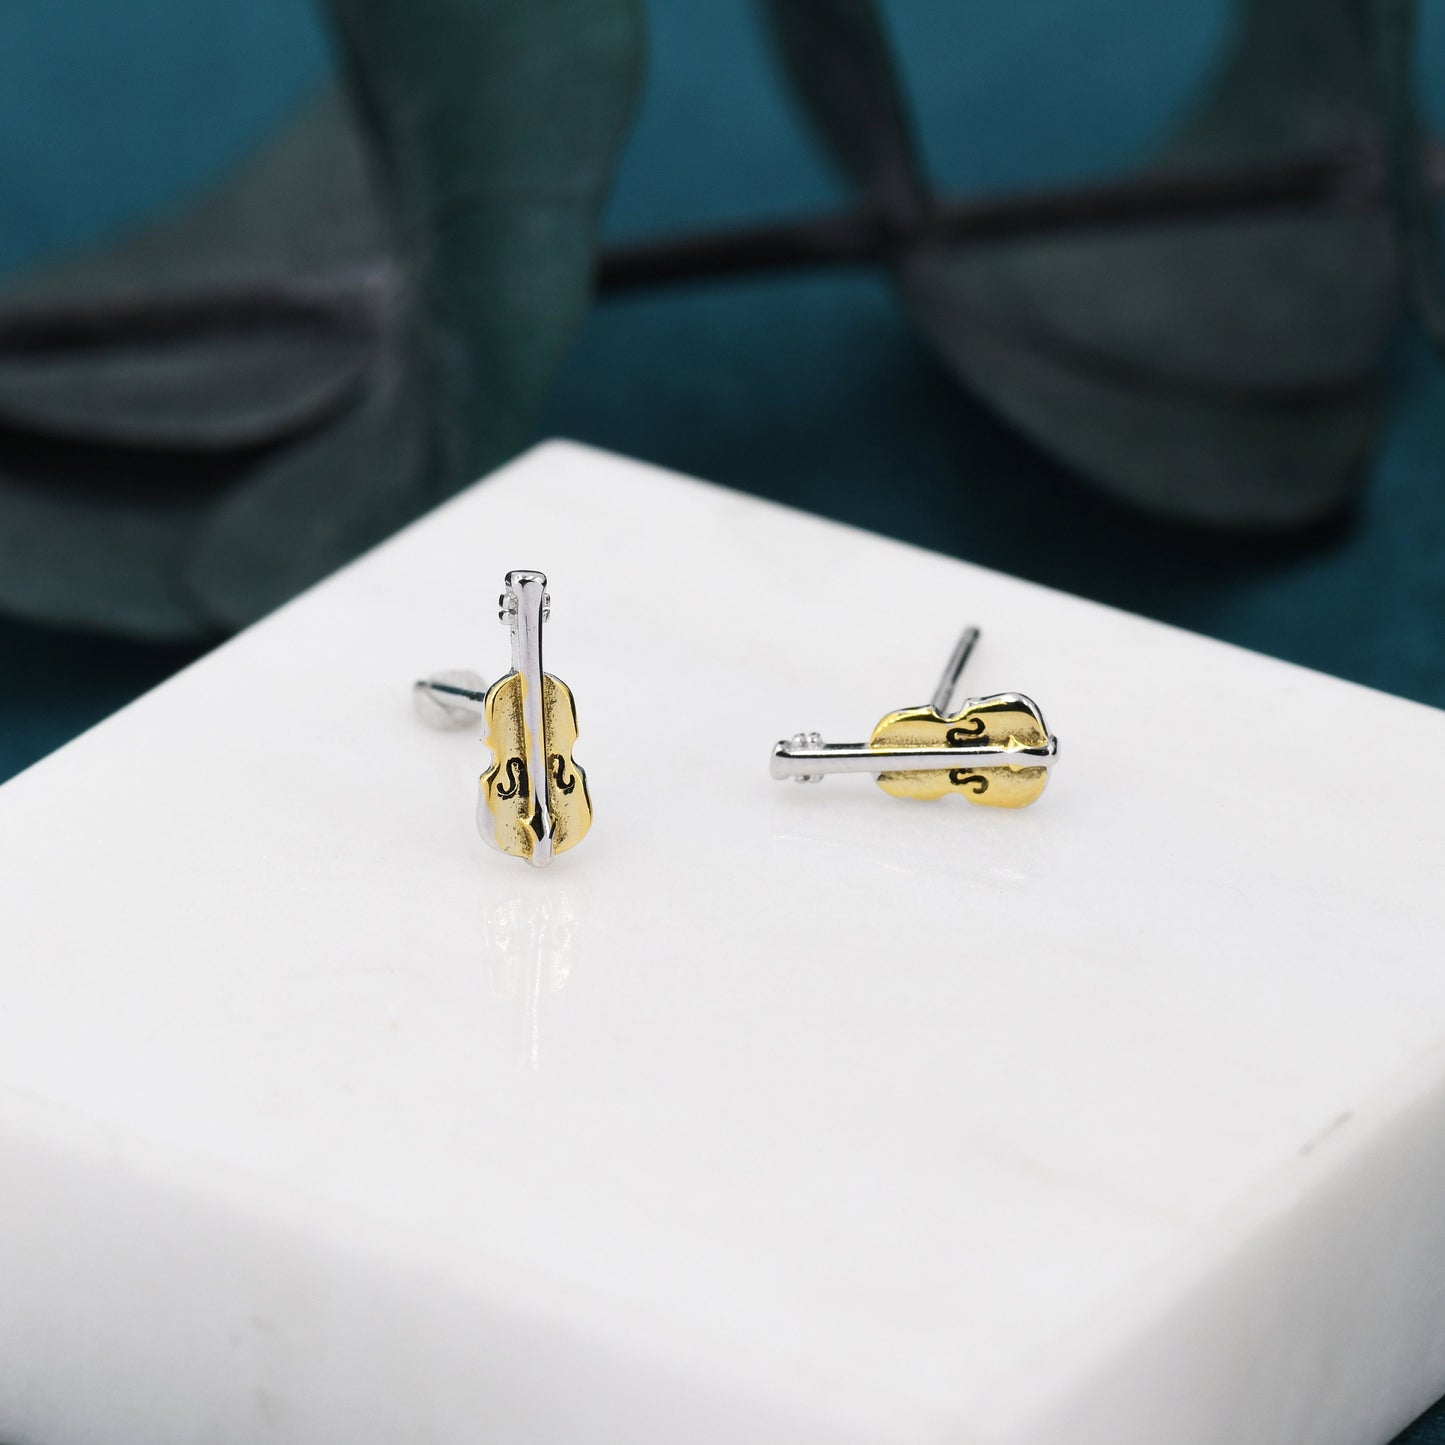 Tiny Violin Stud Earrings in Sterling Silver, Silver or Gold, Music Earrings